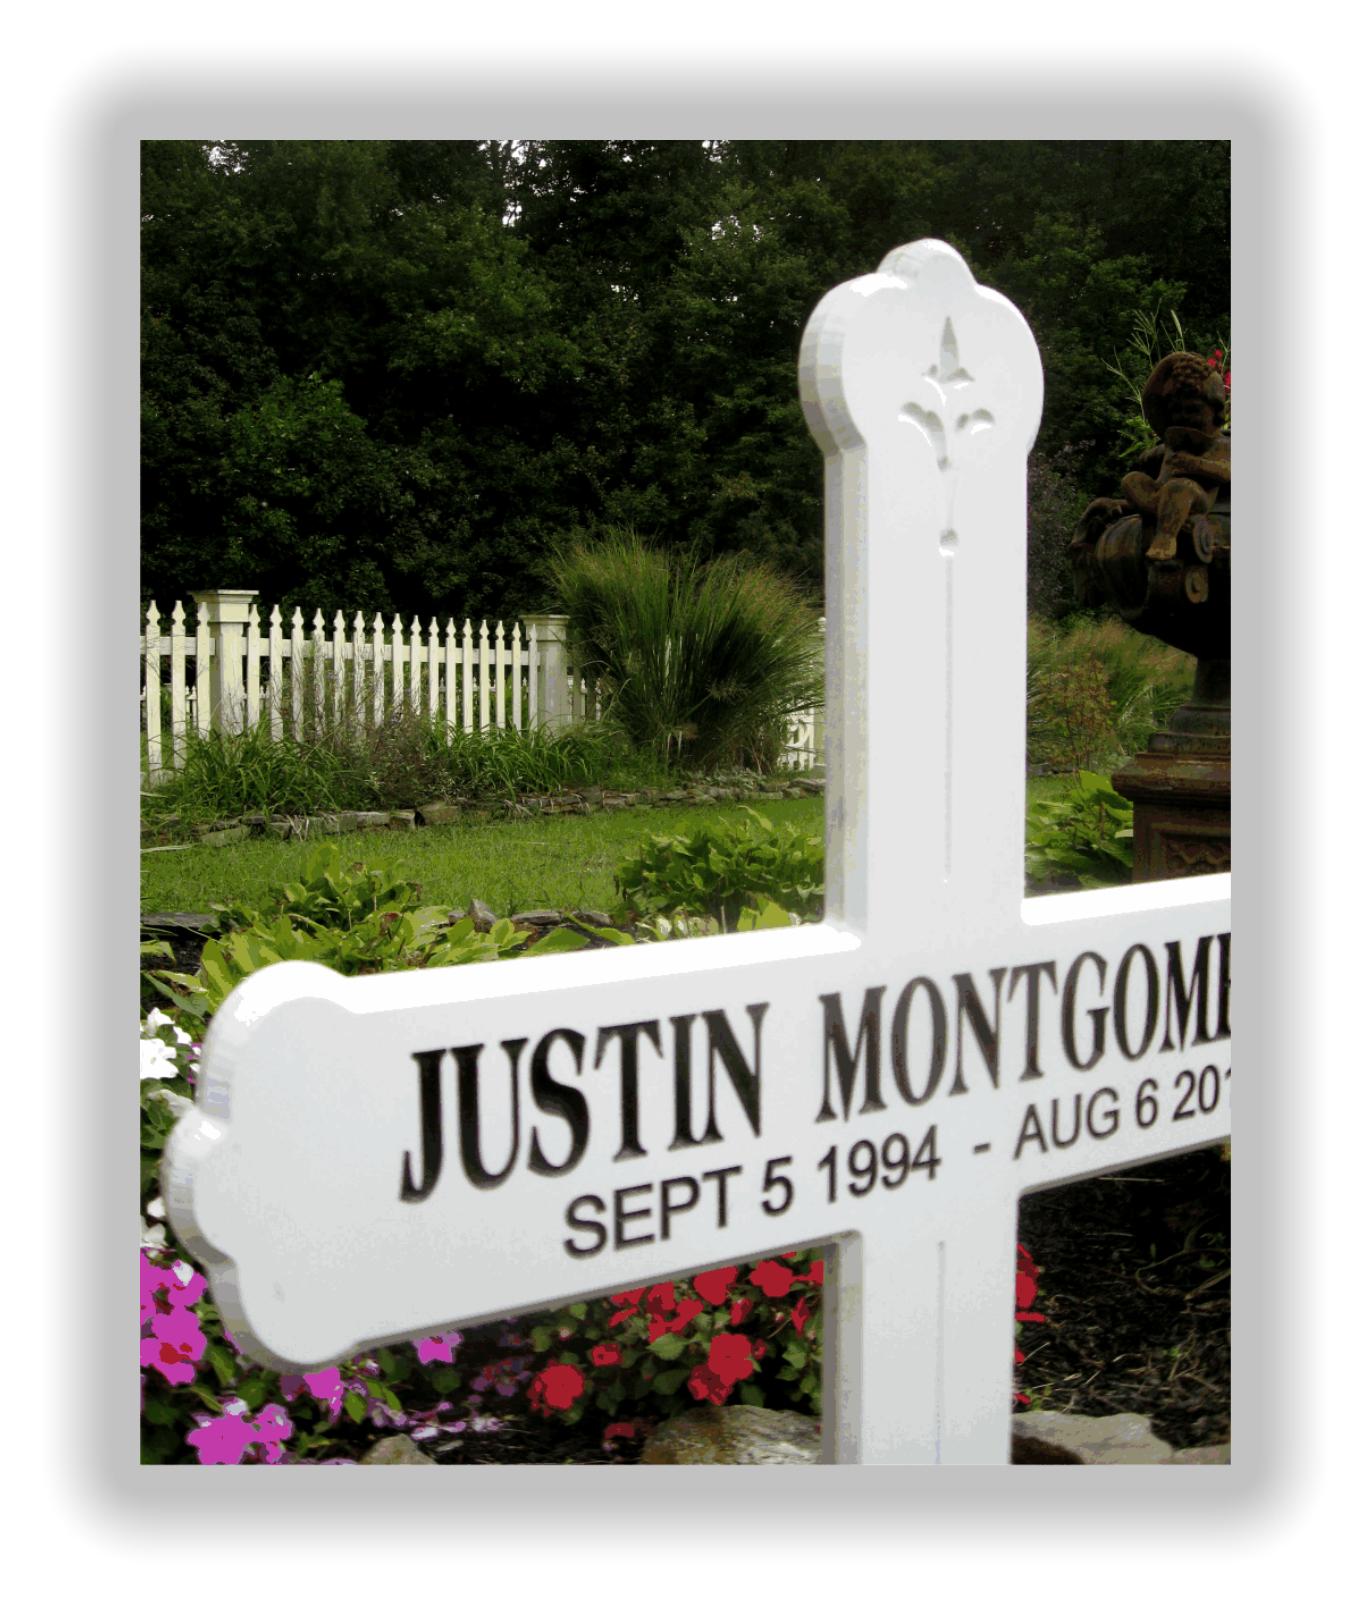 Beautiful roadside memorial with wings and picture roadwaycross.com